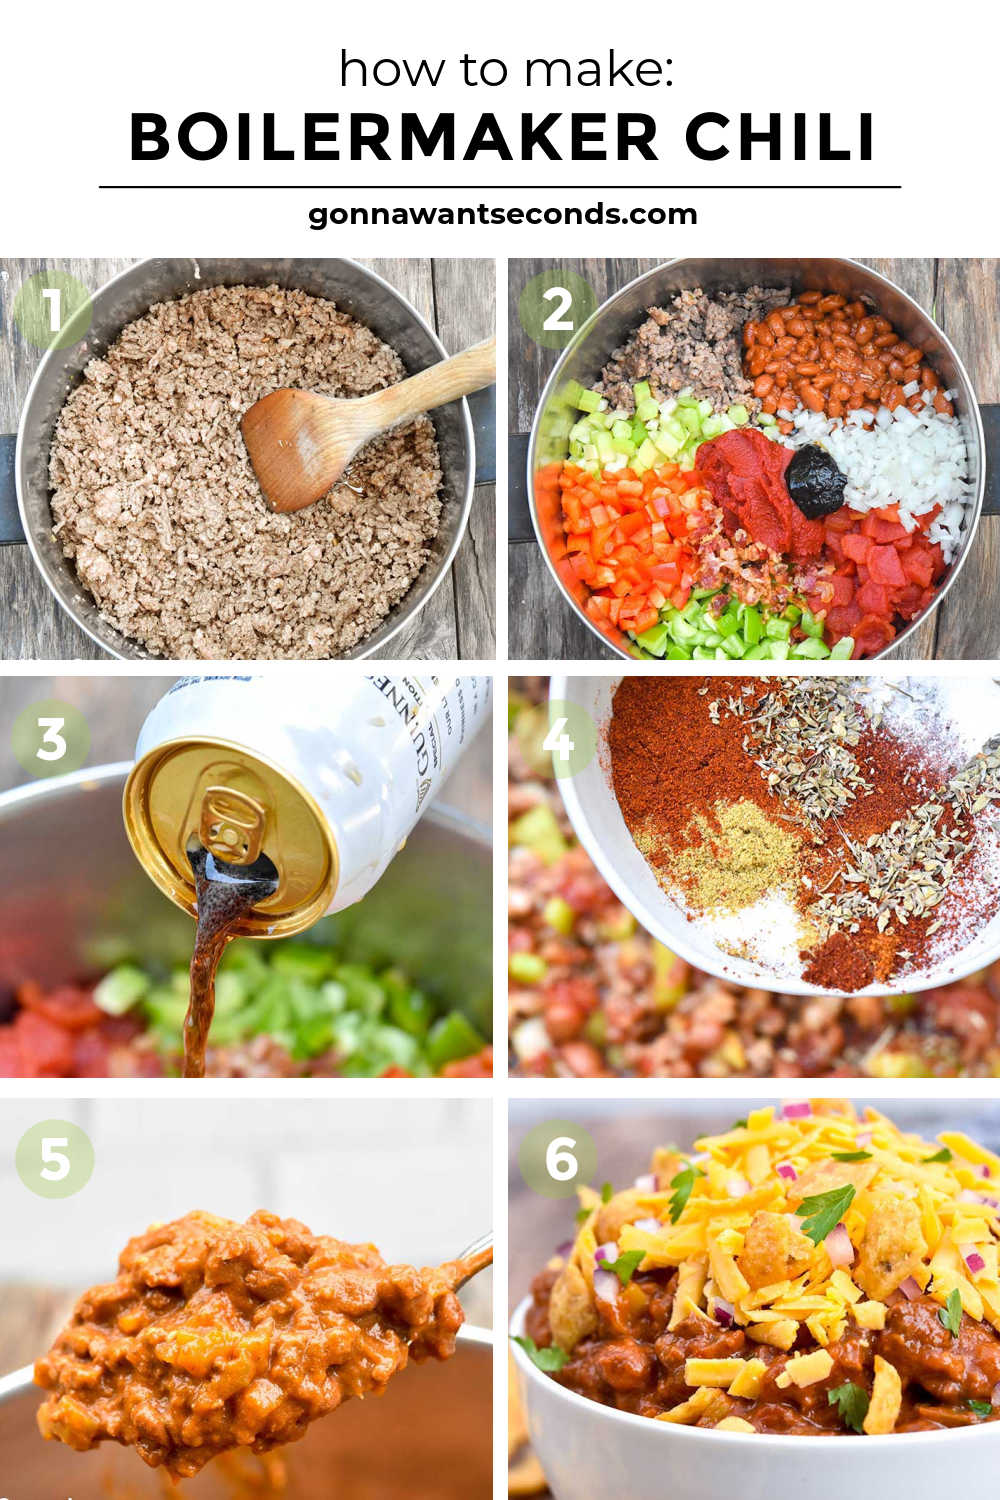 step by step how to make boilermaker chili